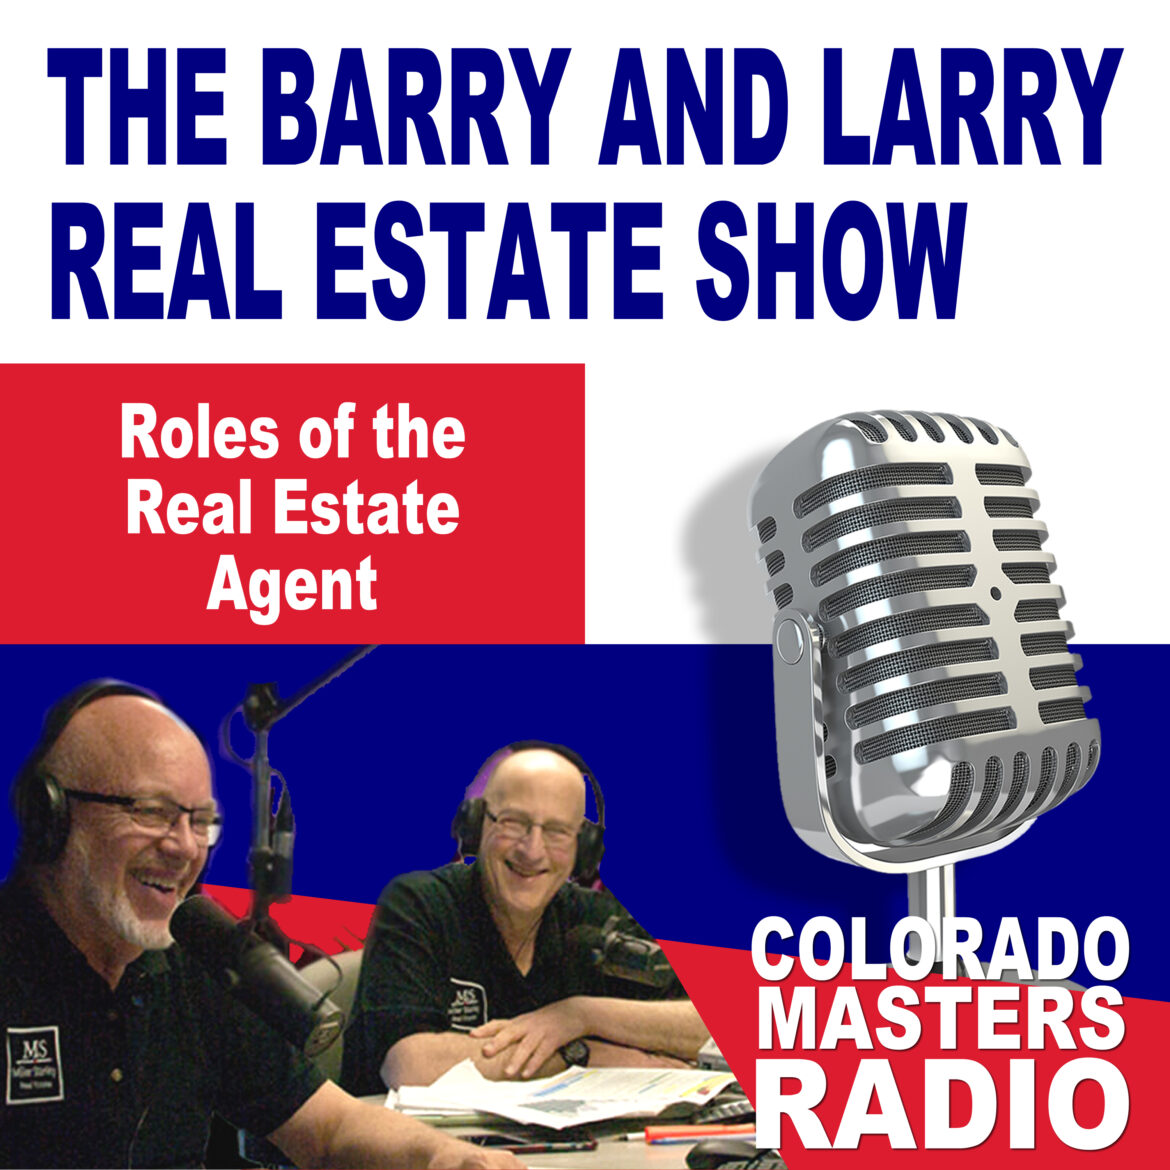 The Larry and Barry Real Estate Show - Roles of the Real Estate Agent